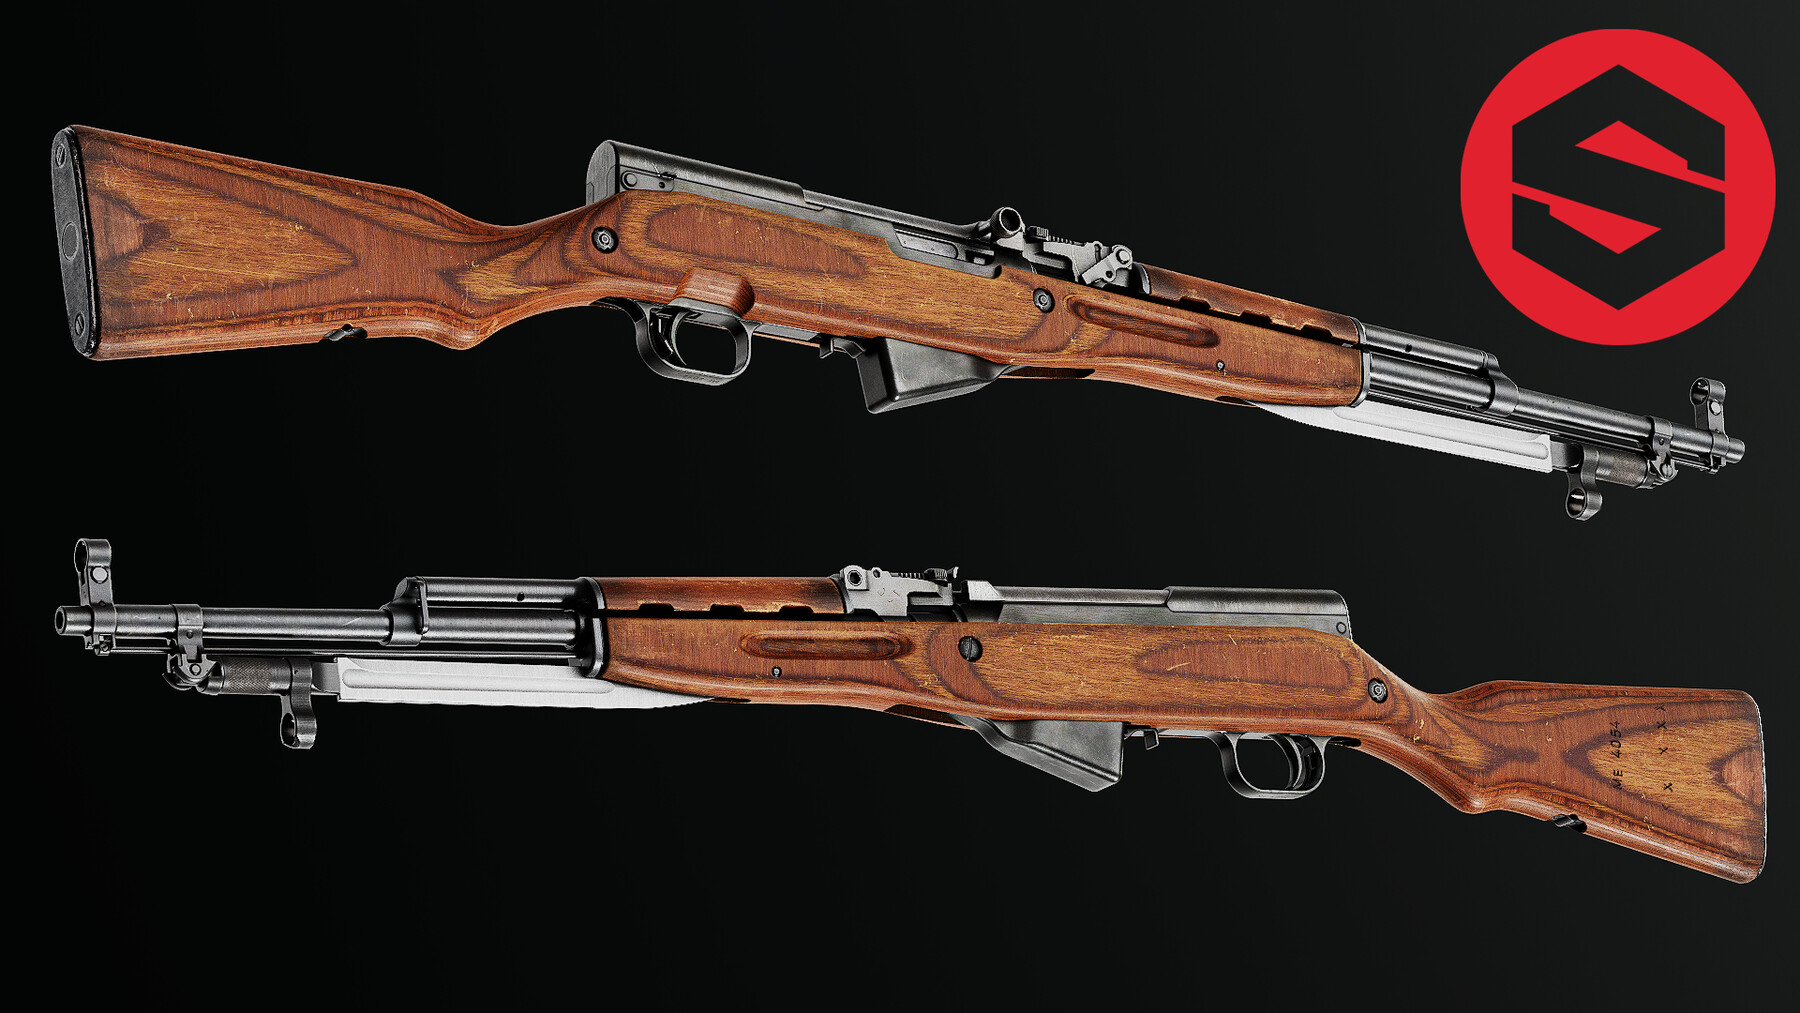 Sks Rifle wallpapers for desktop download free Sks Rifle pictures and  backgrounds for PC  moborg